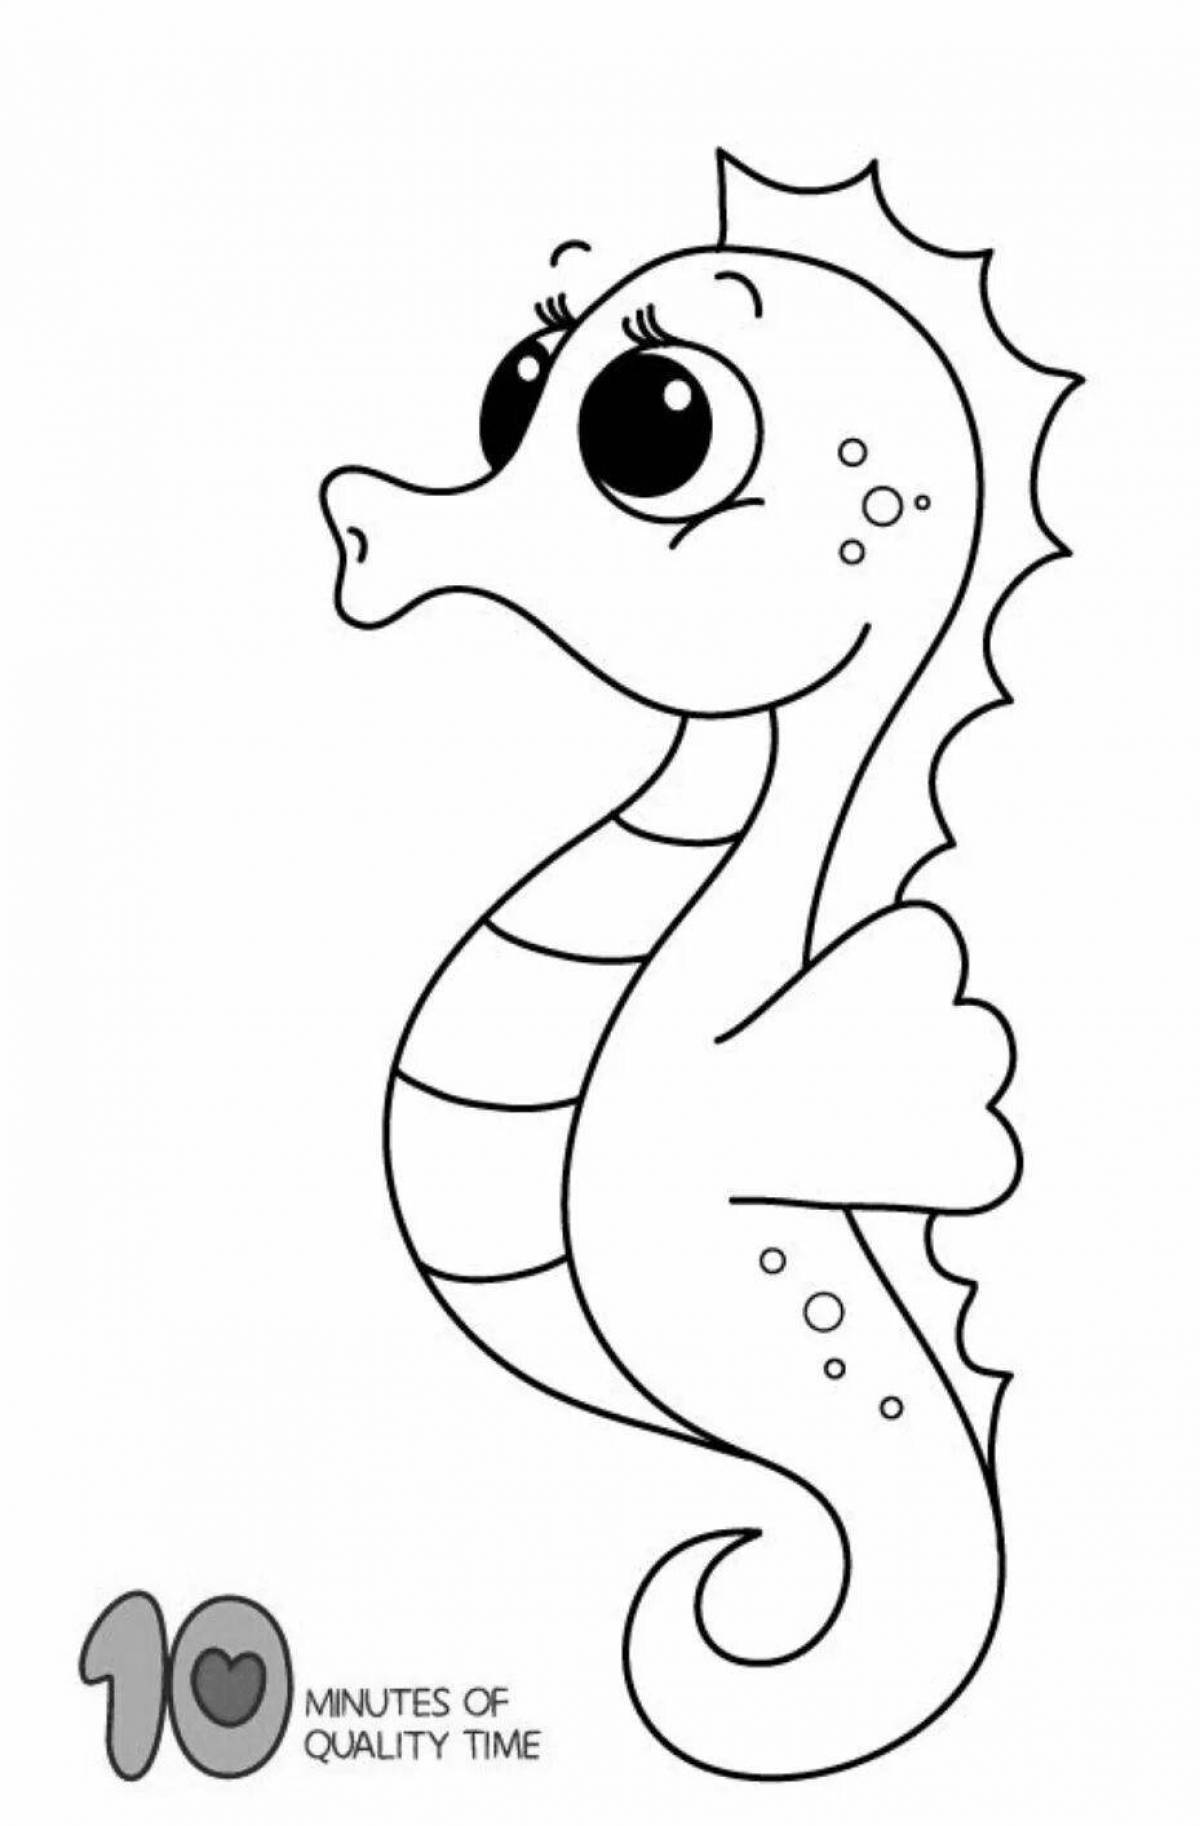 Vibrant seahorse coloring page for kids